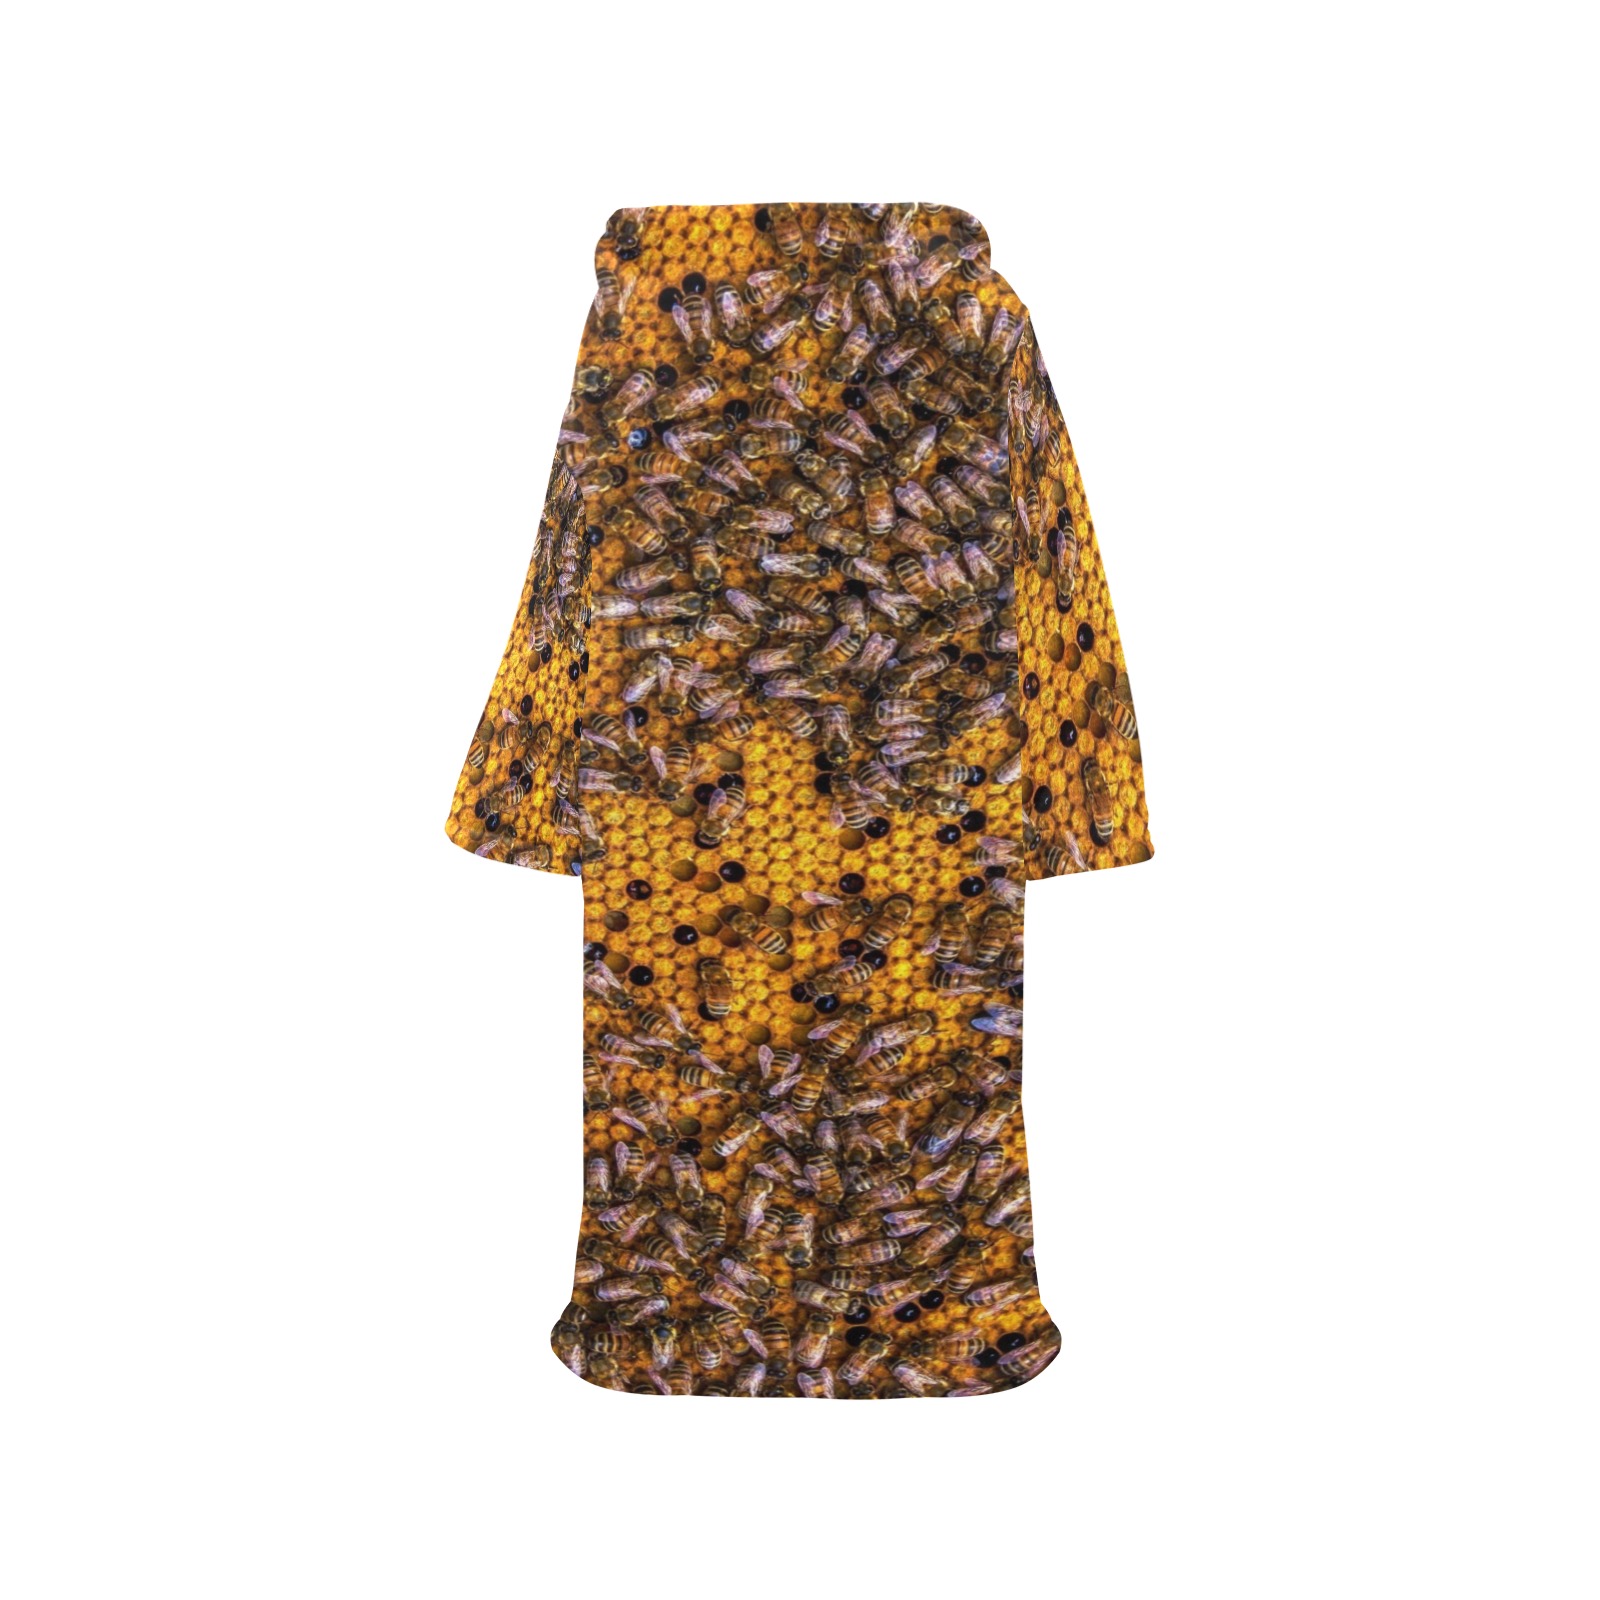 HONEY BEES 3 Blanket Robe with Sleeves for Adults